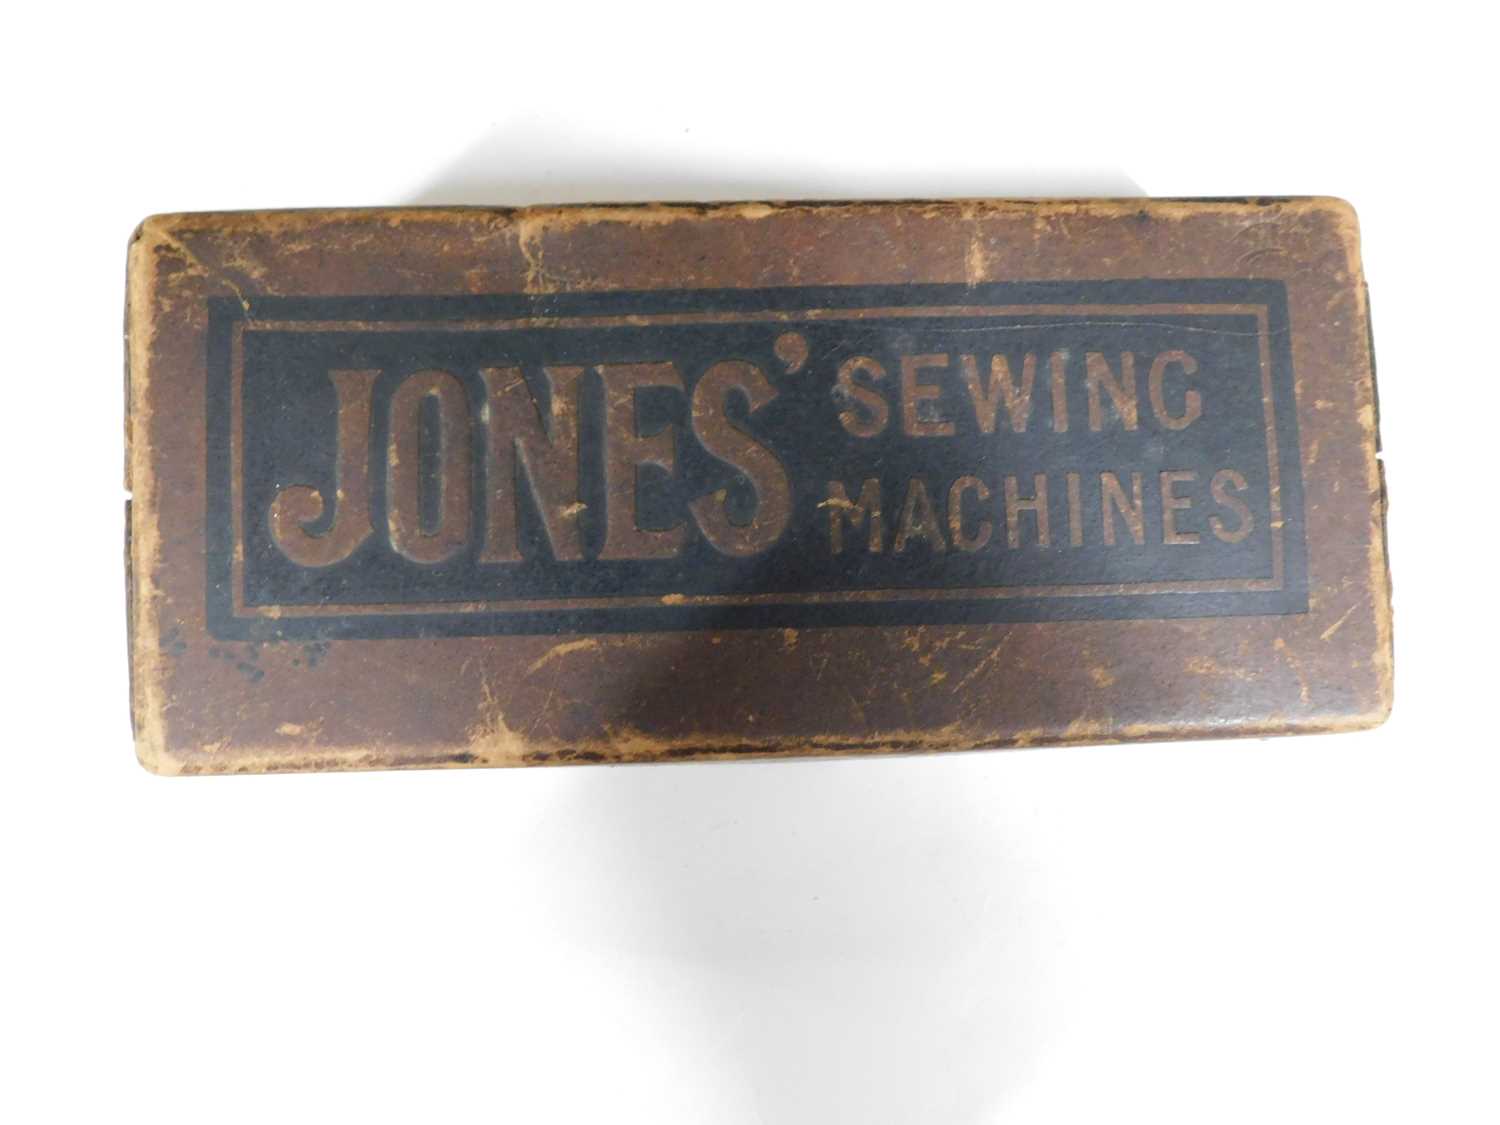 A c.1879- 1909 sewing machine by Jones, Manchester - Image 6 of 7